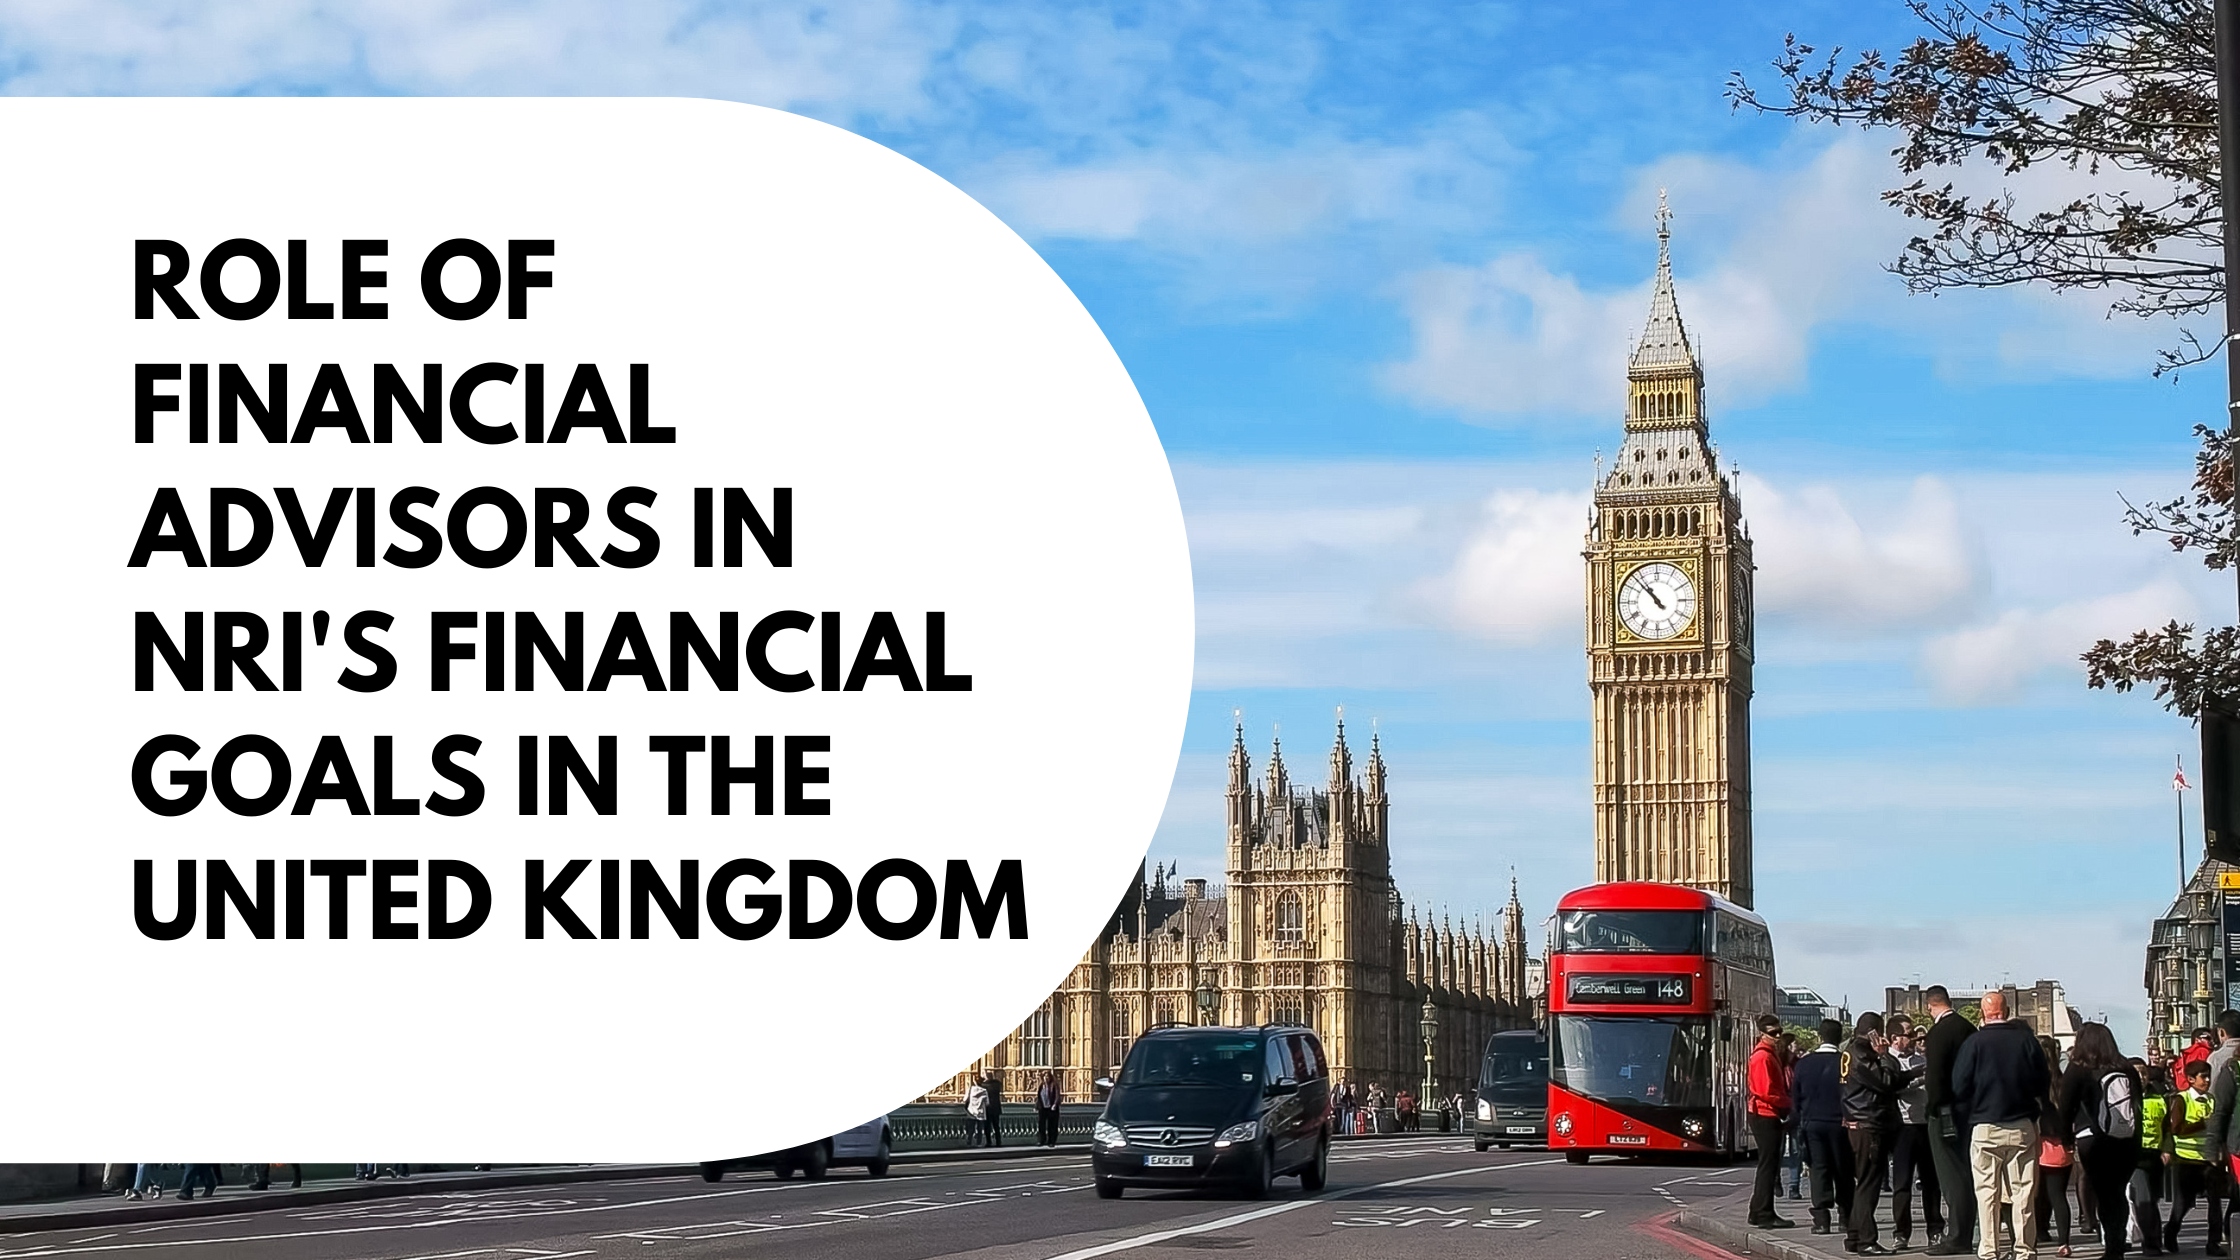 Role of Financial Advisors in NRI’s Financial Goals in the United Kingdom